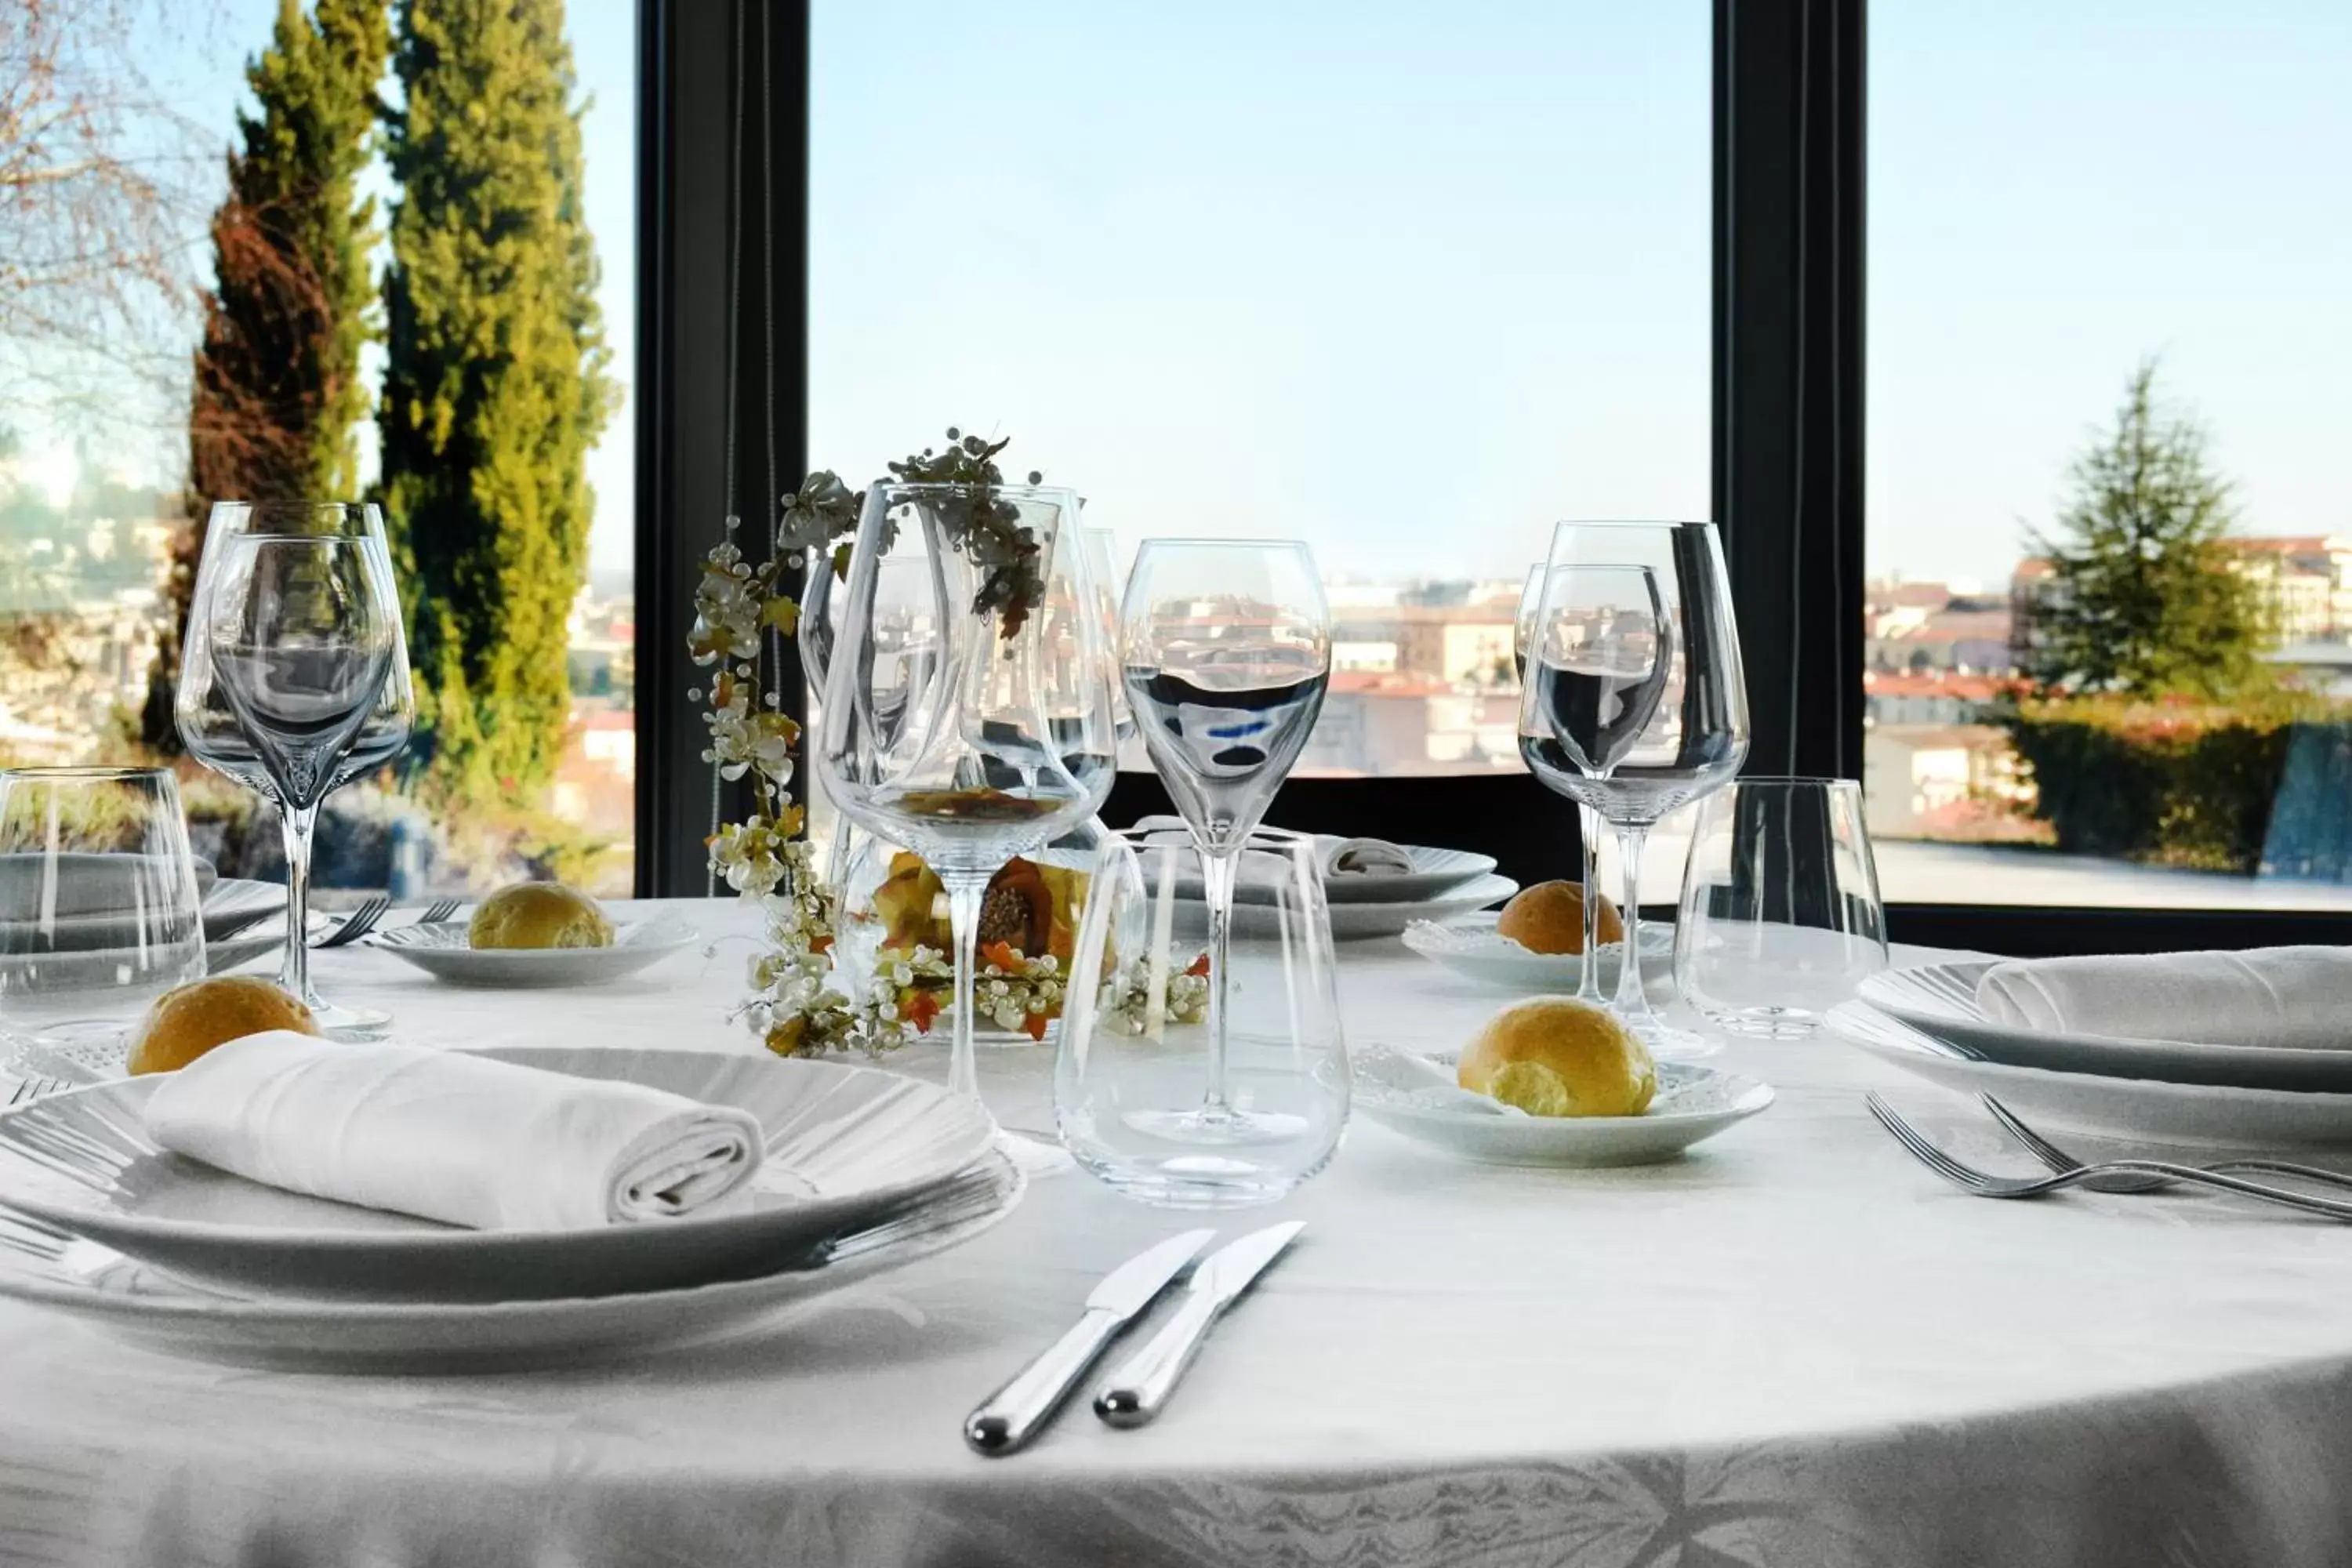 Restaurant/Places to Eat in don guglielmo panoramic Hotel & Spa